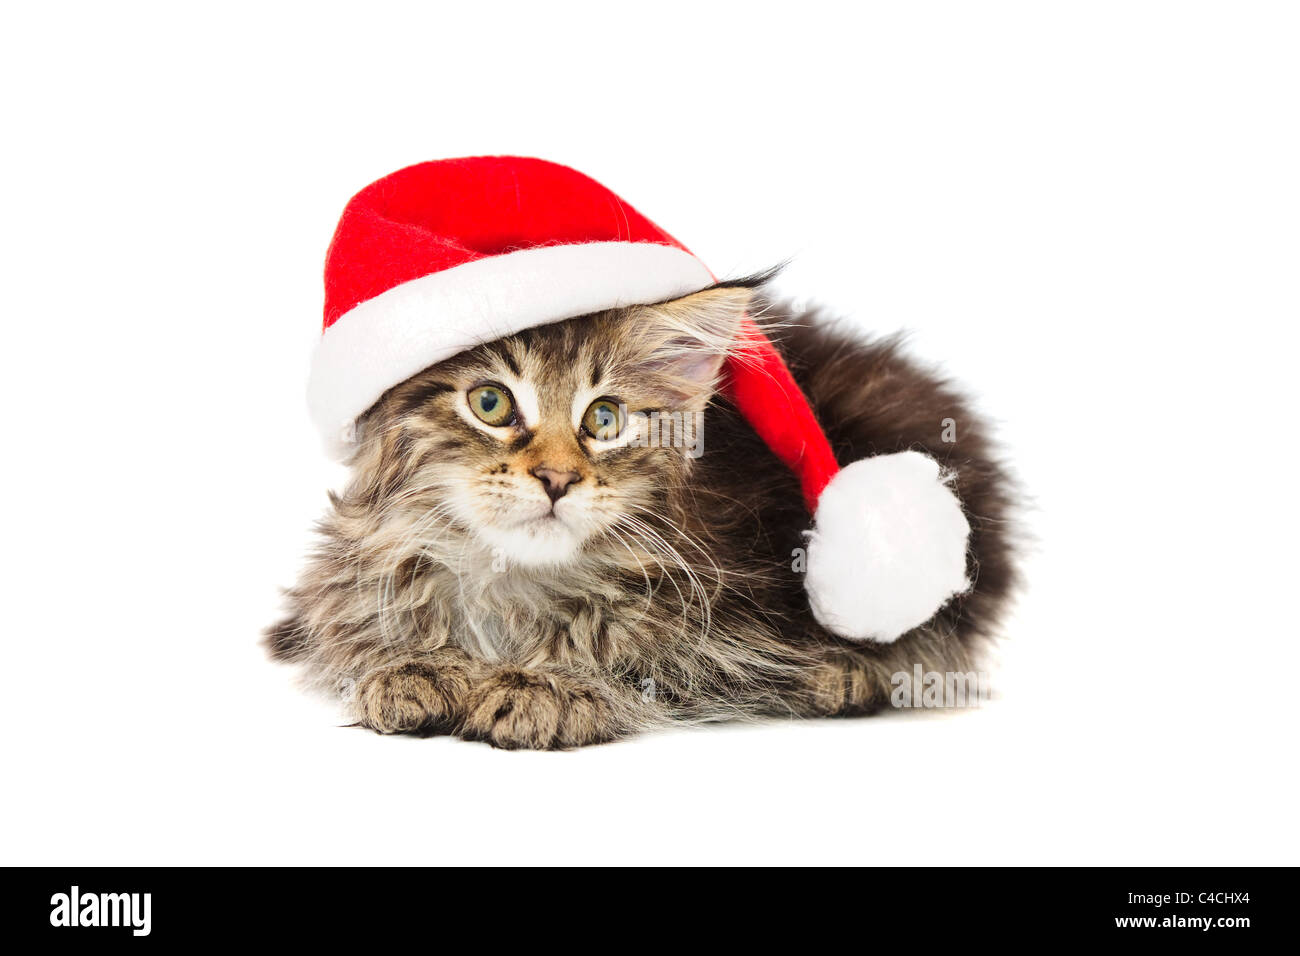 Chaton dans red hat against white background Banque D'Images